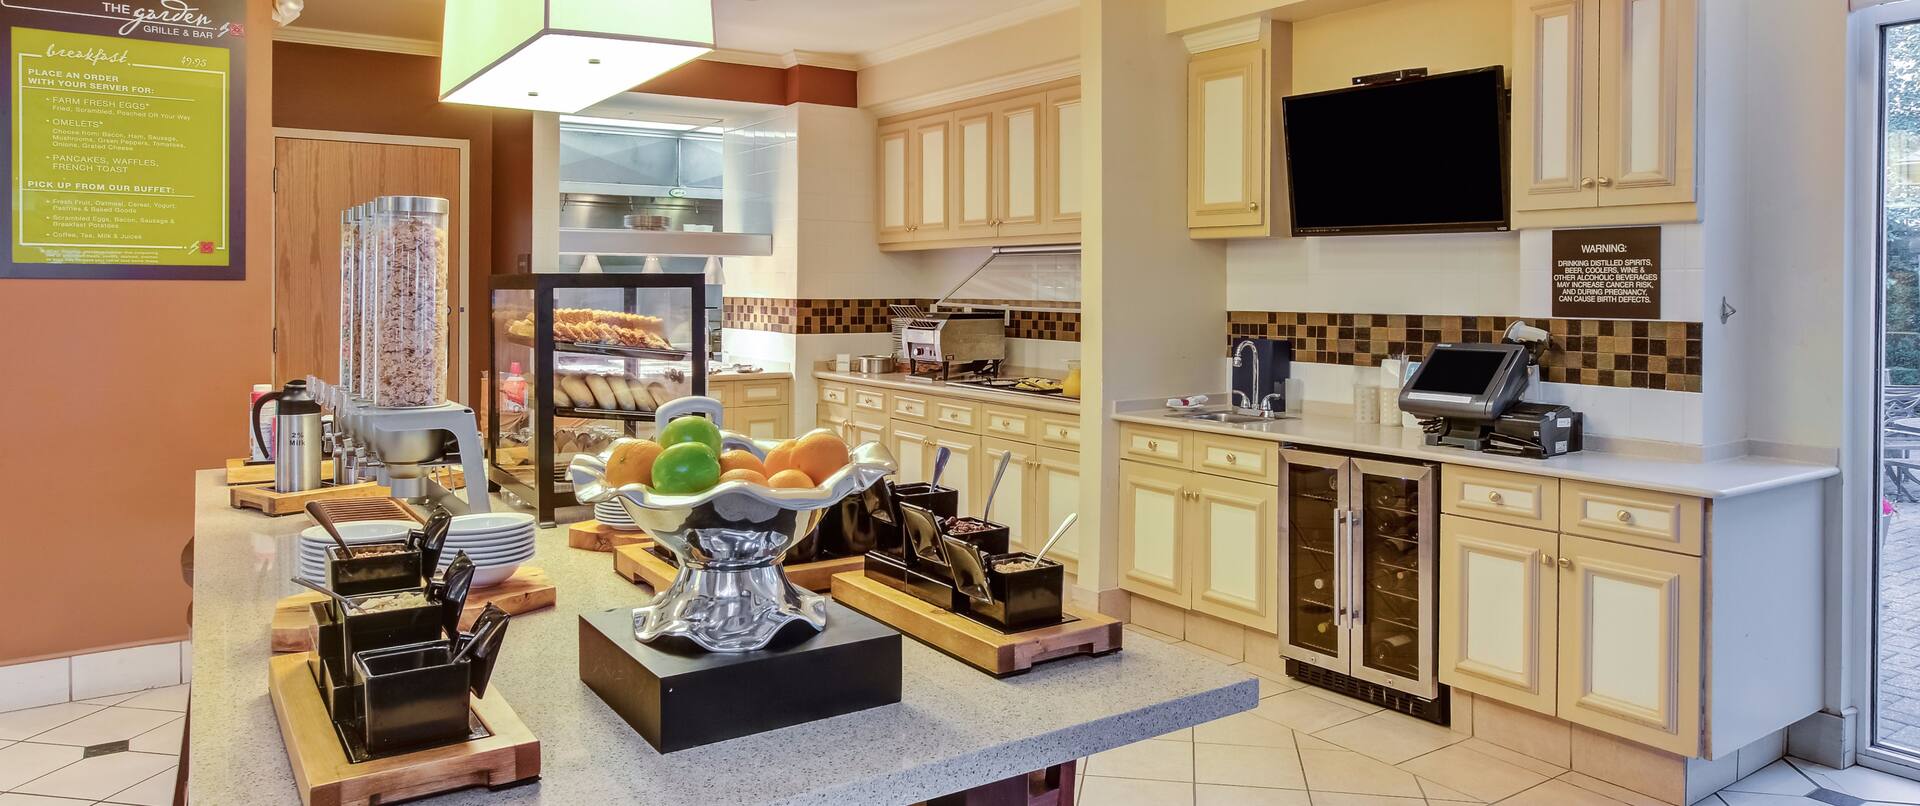 Breakfast serving area with cereals, oatmeal, pastries, fruits, and dining amenities